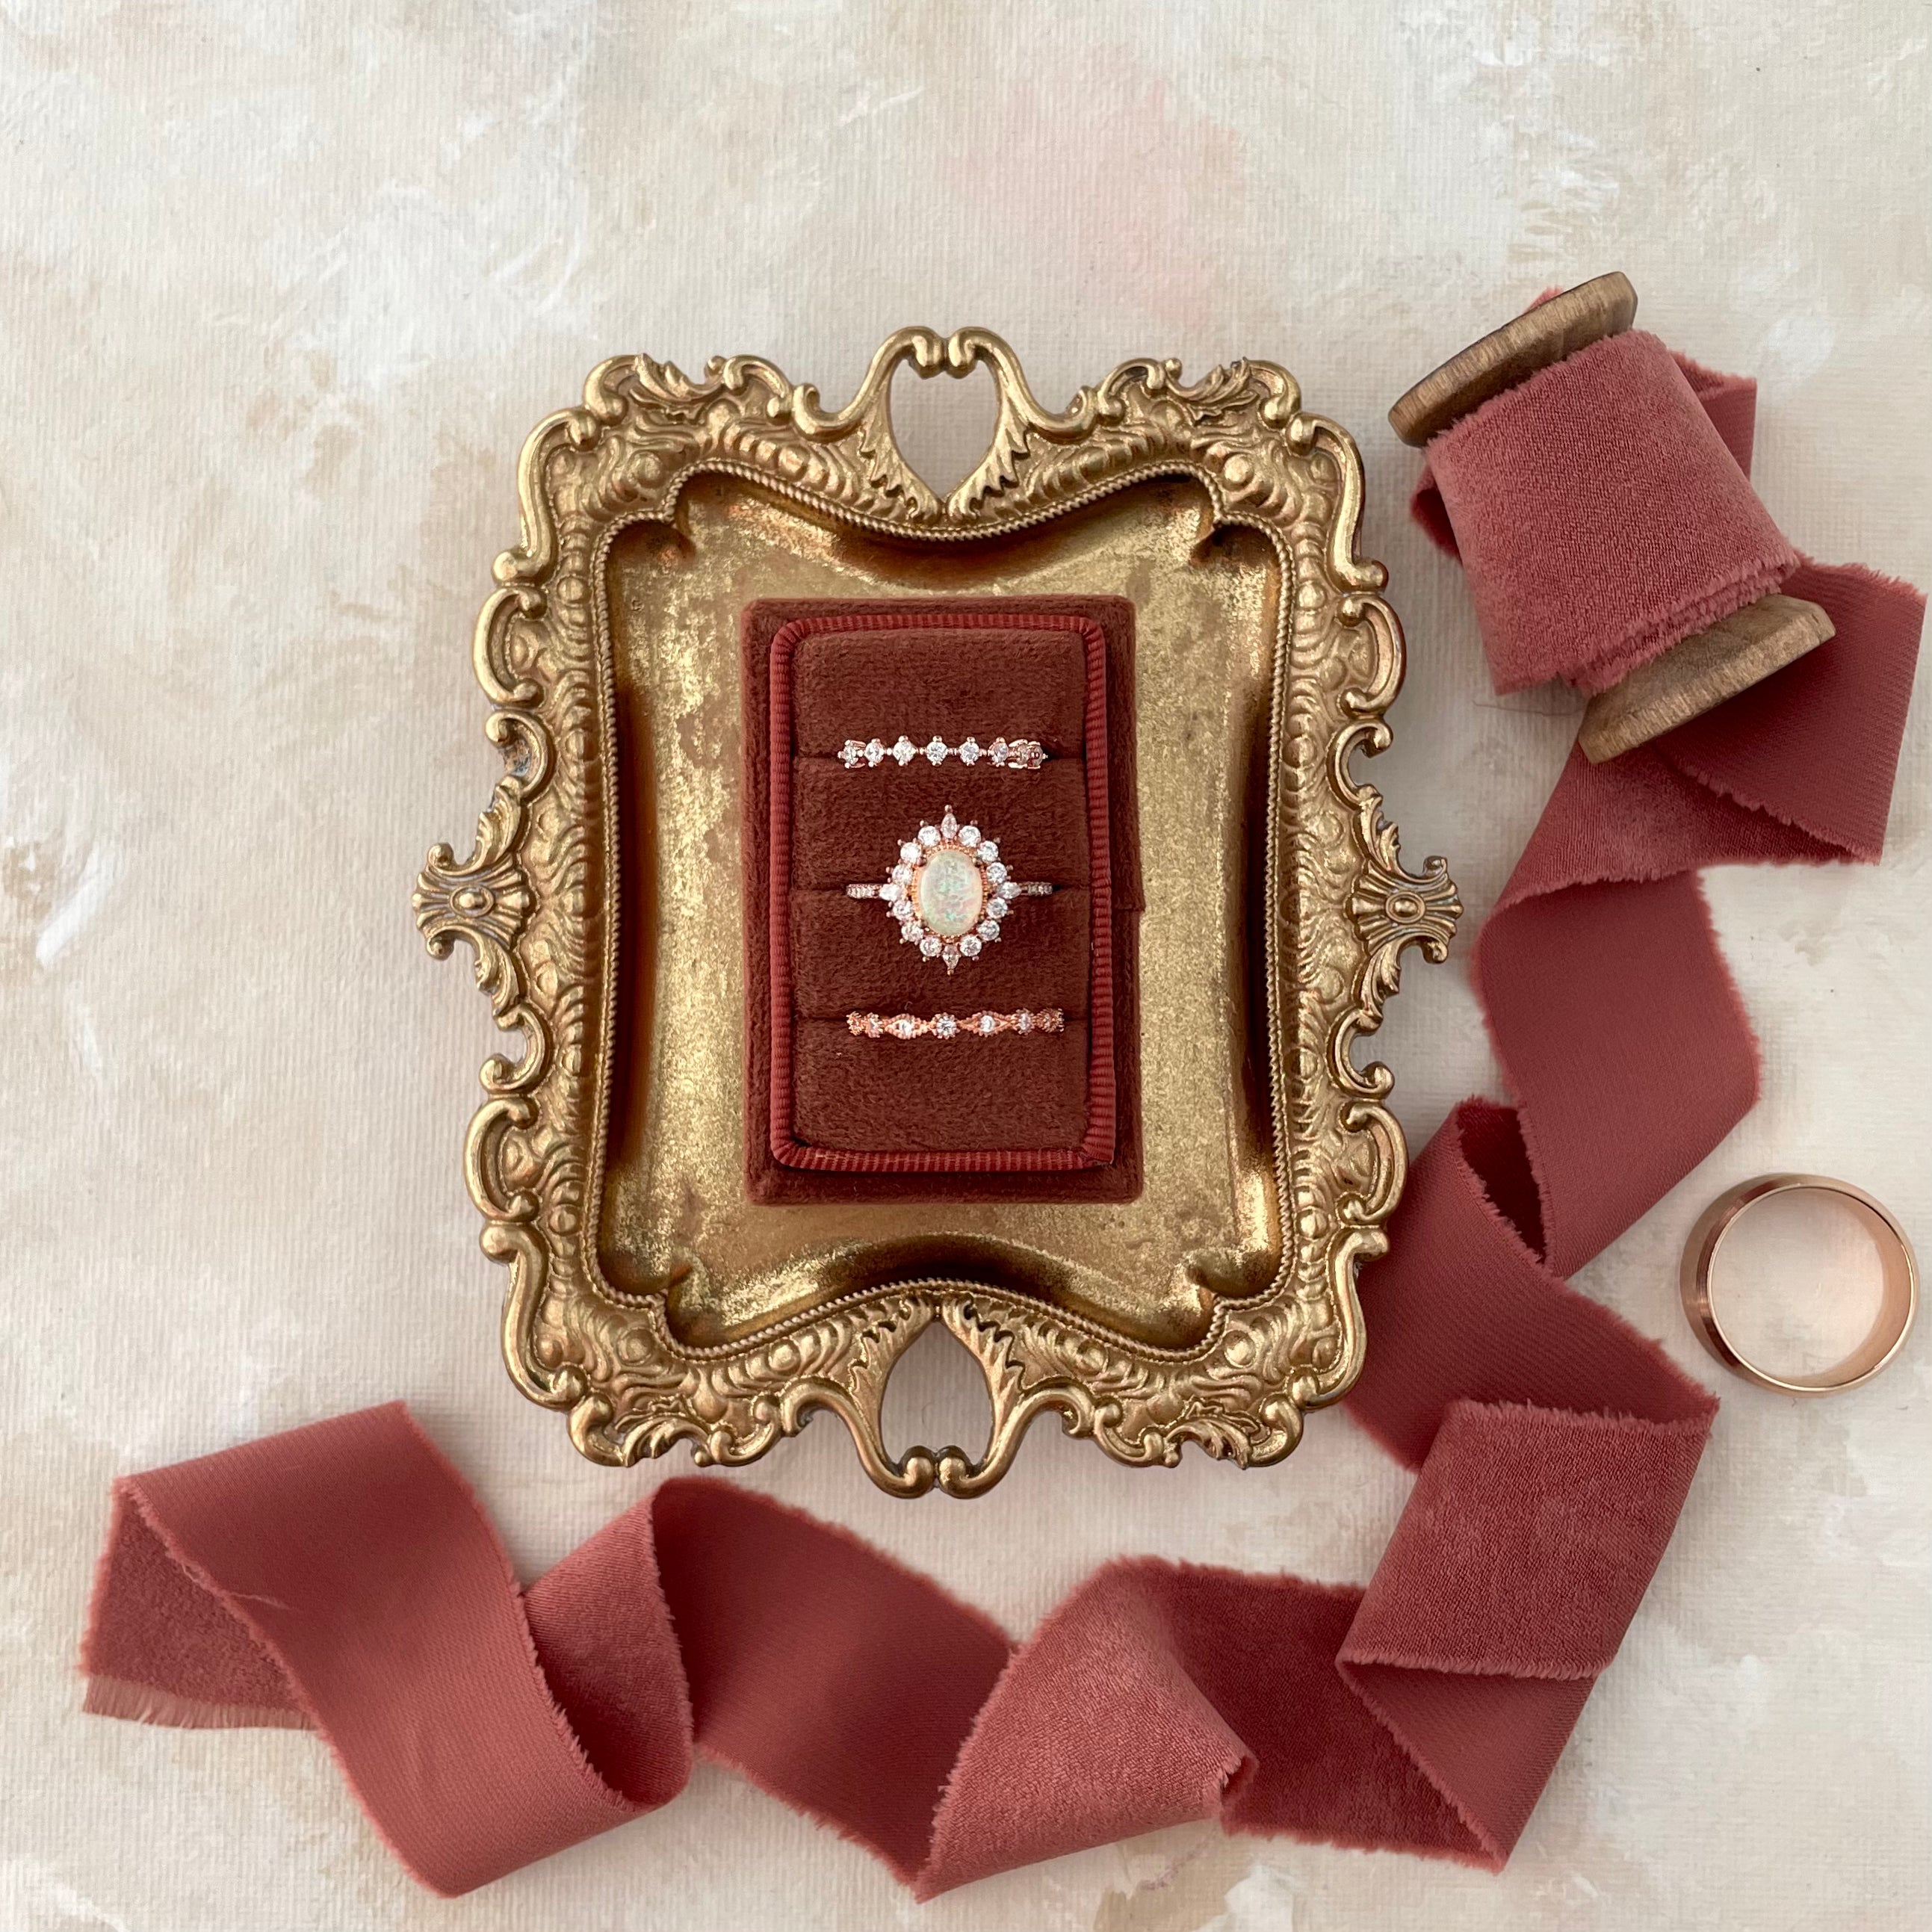 Terracotta Ring Box, 3 slot ring box on vintage gold tray styled with Terracotta ribbon and gold wedding ring - Flat Lay Props from Champagne & GRIT